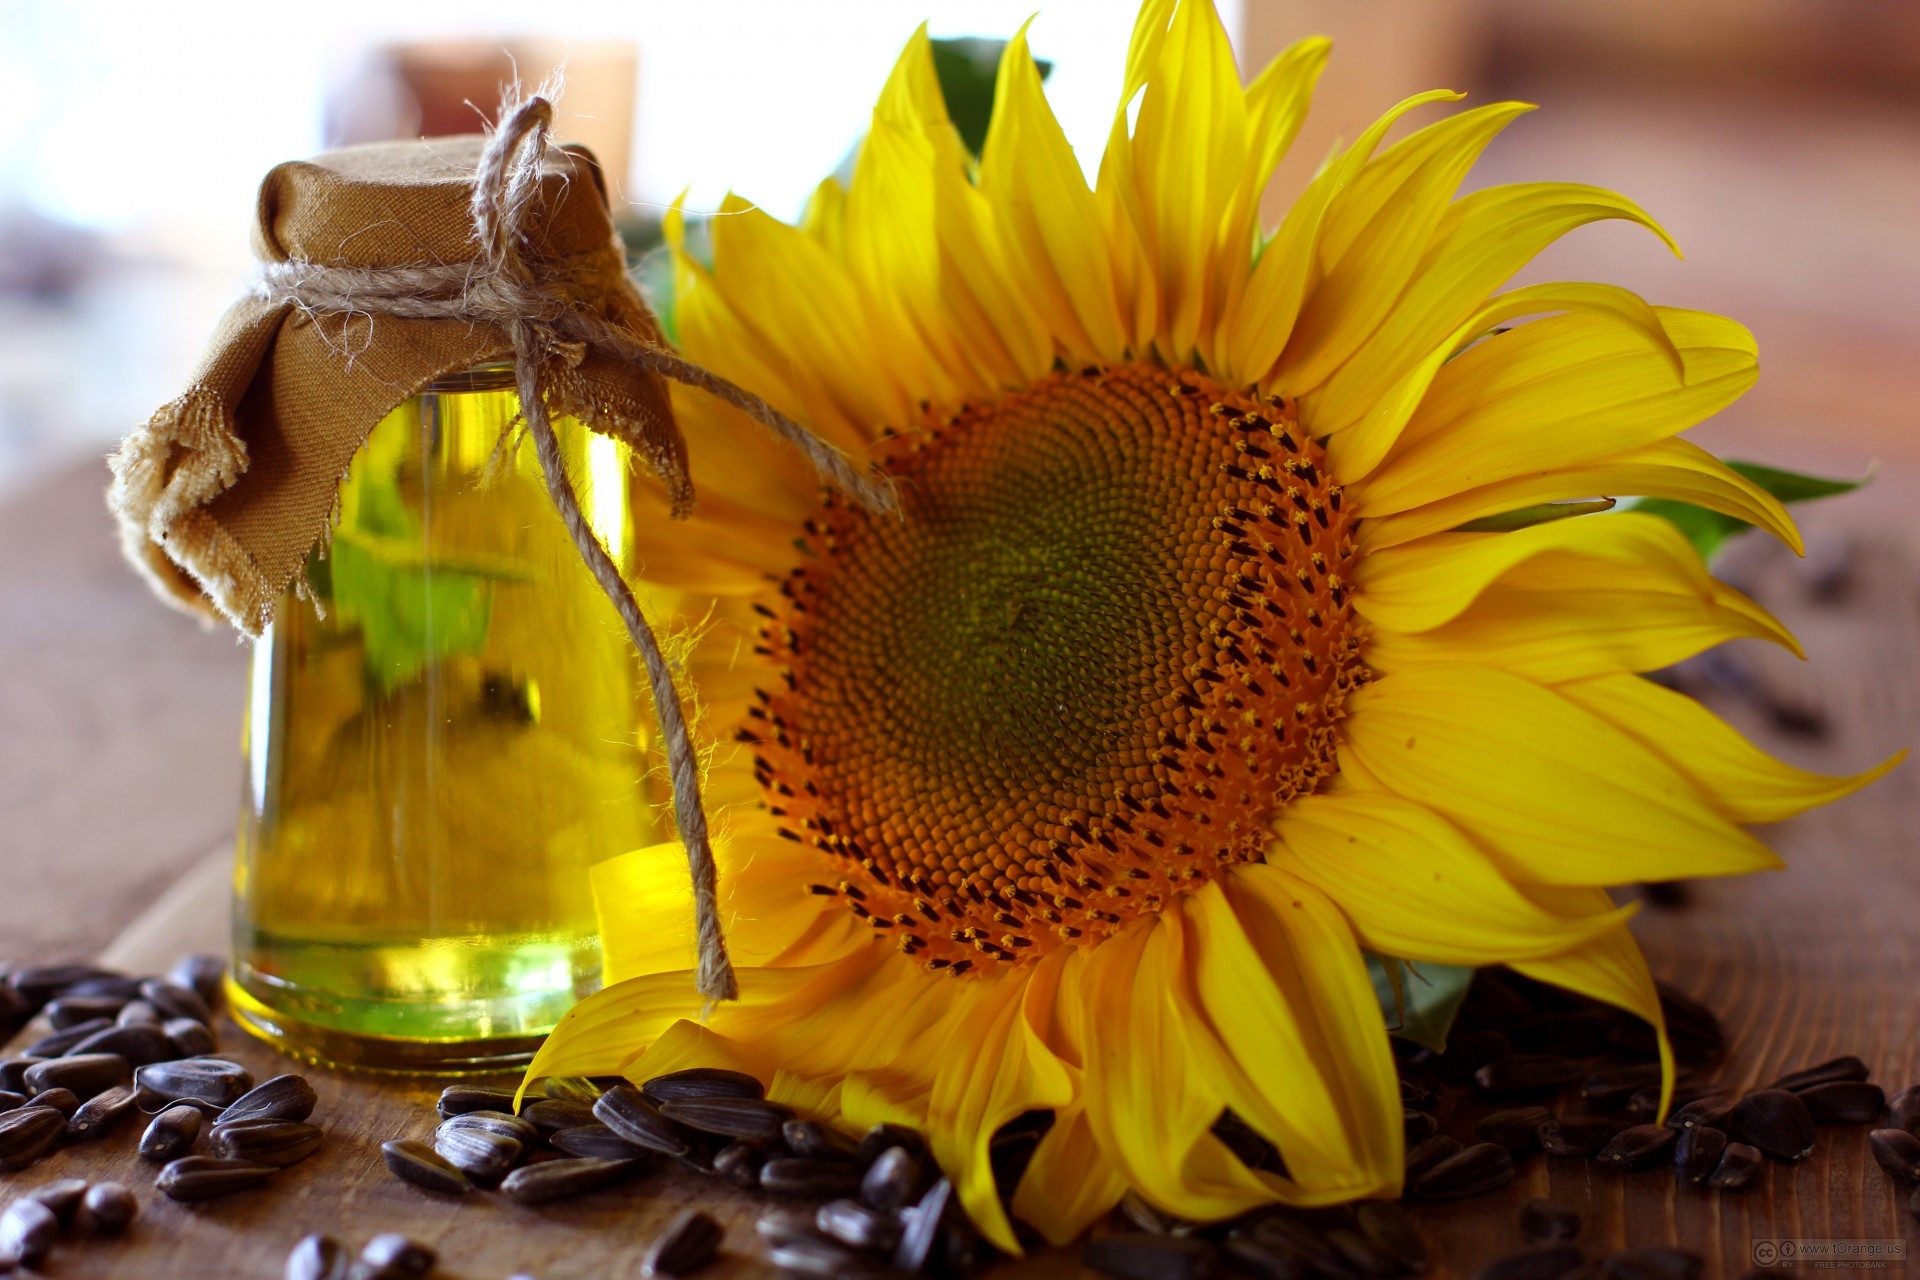 Export prices for sunflower oil fell to the lowest level in the 2021/22 season